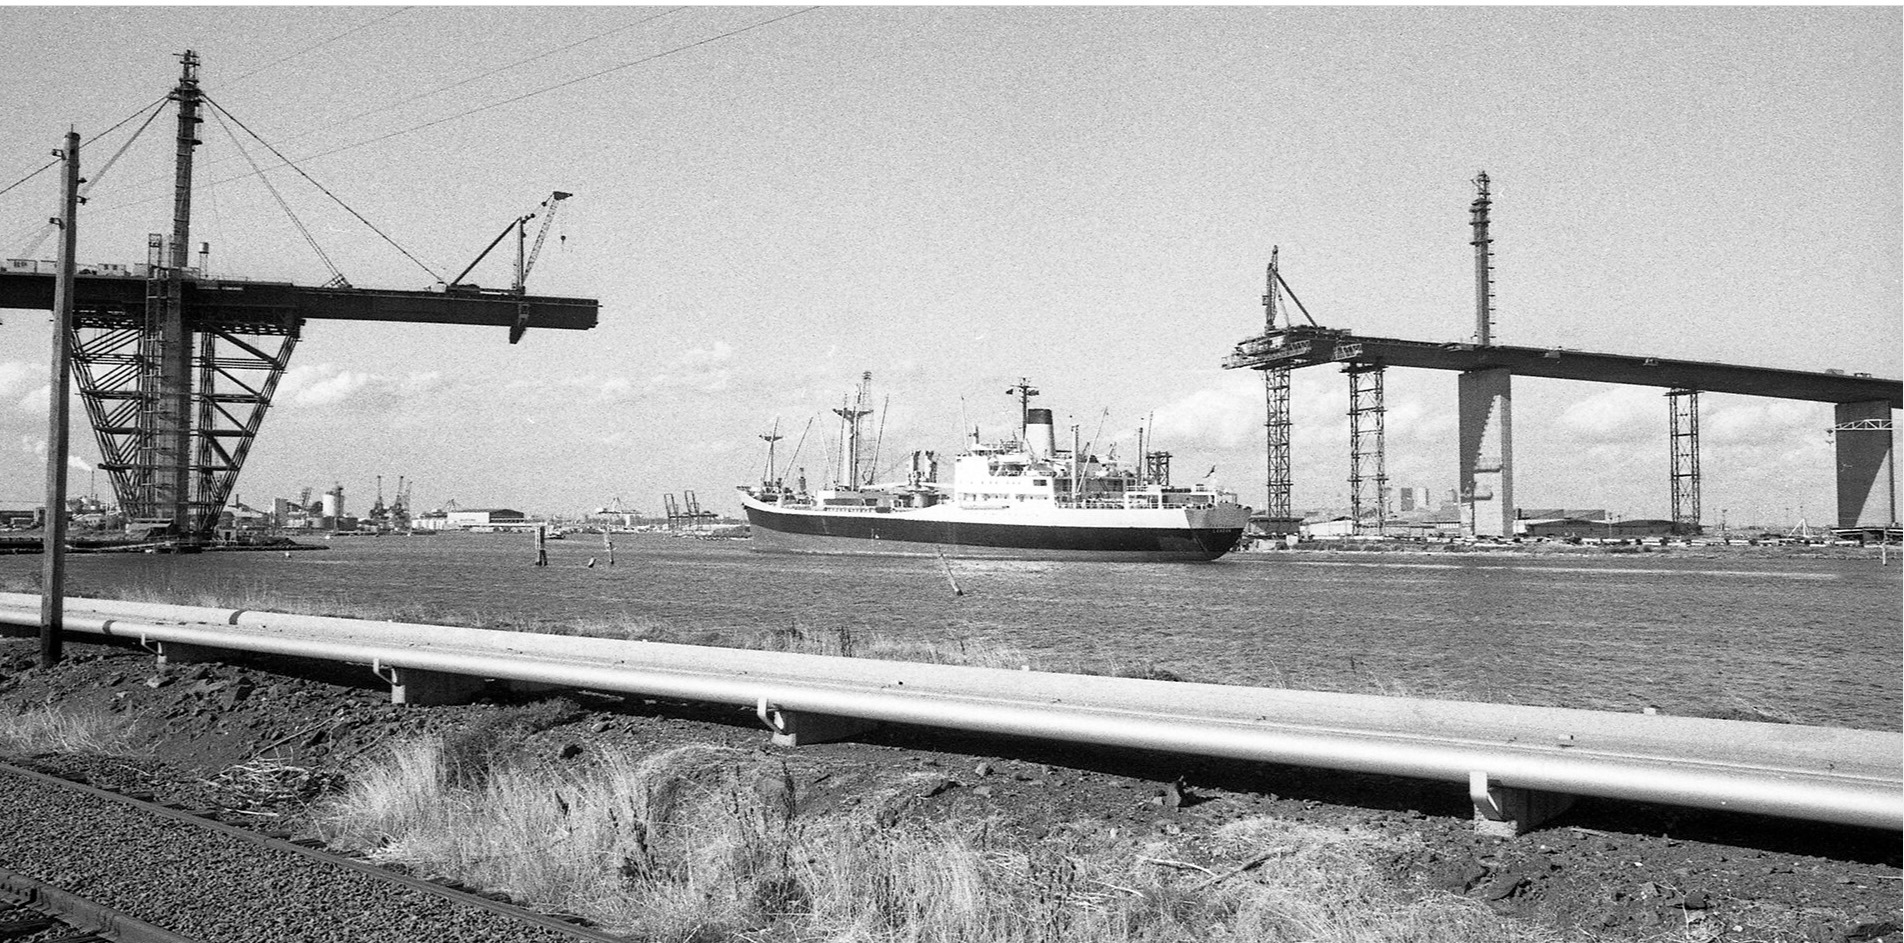 Partially finished West Gate, with spans from the west and east yet to meet in the midd.e Photo includes a large ship and construction cranes.